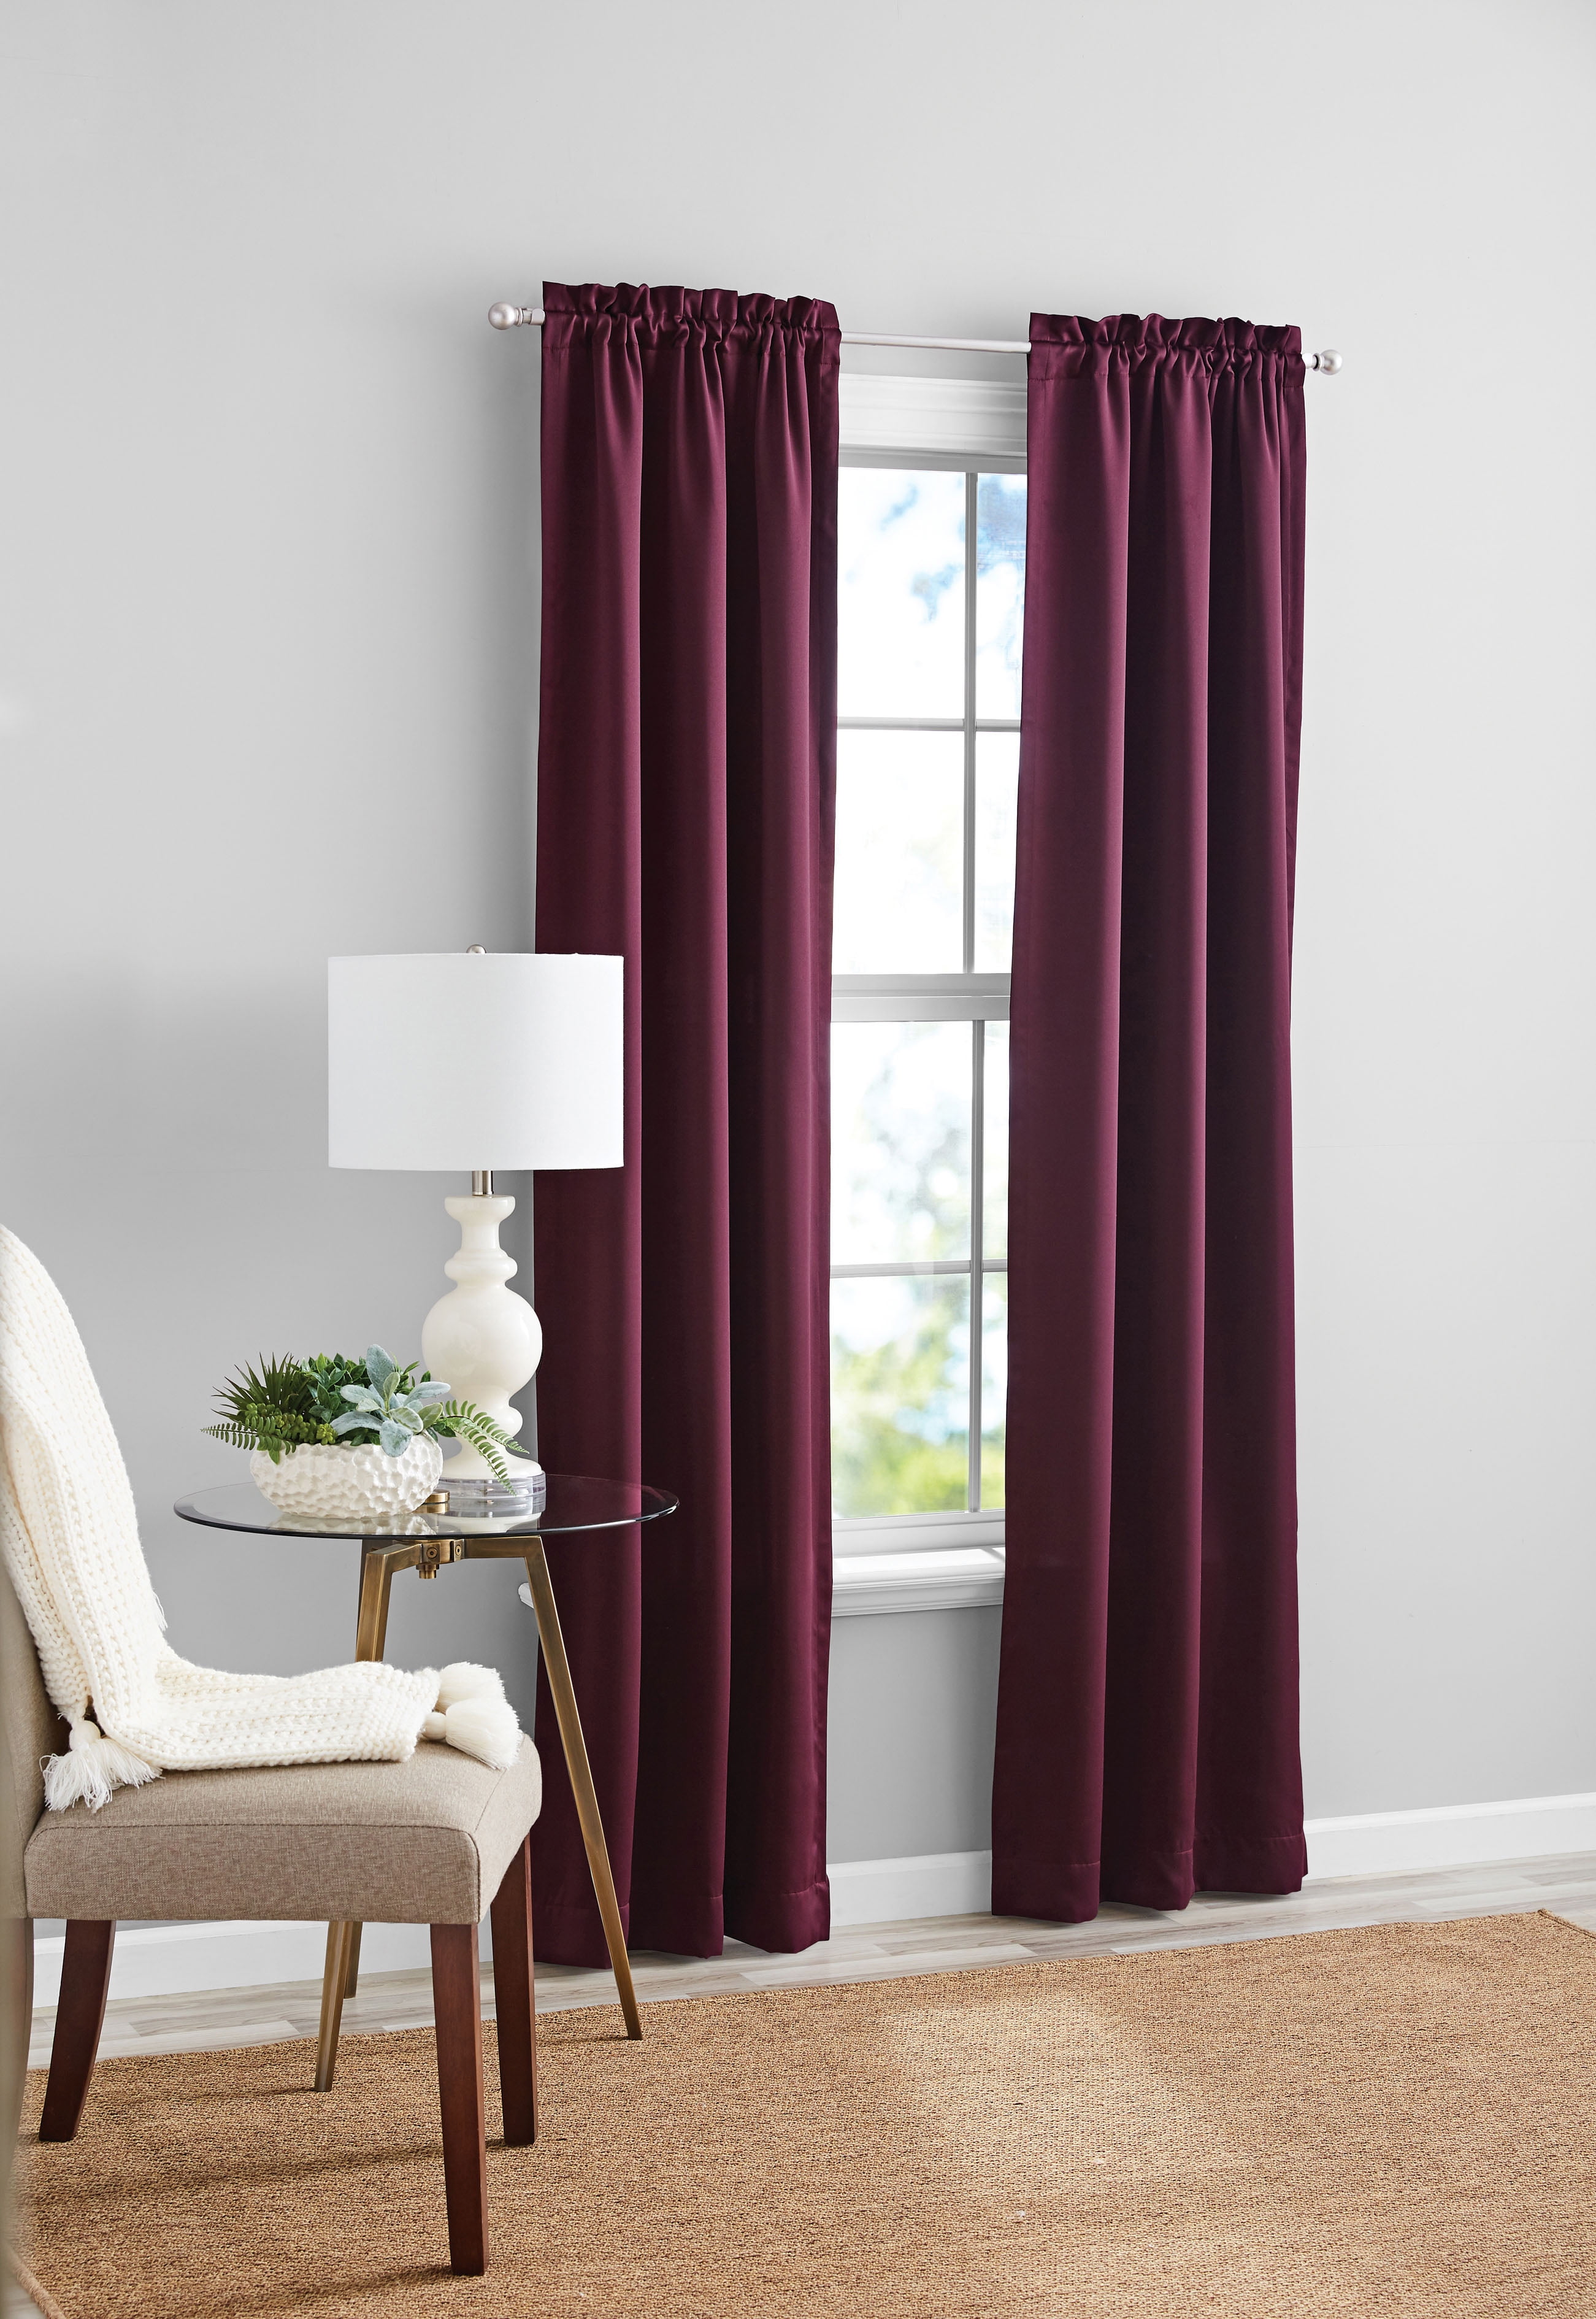 2 Grommet Woven Blackout Curtain Panels 84 inch long Solid Color Darkening. 